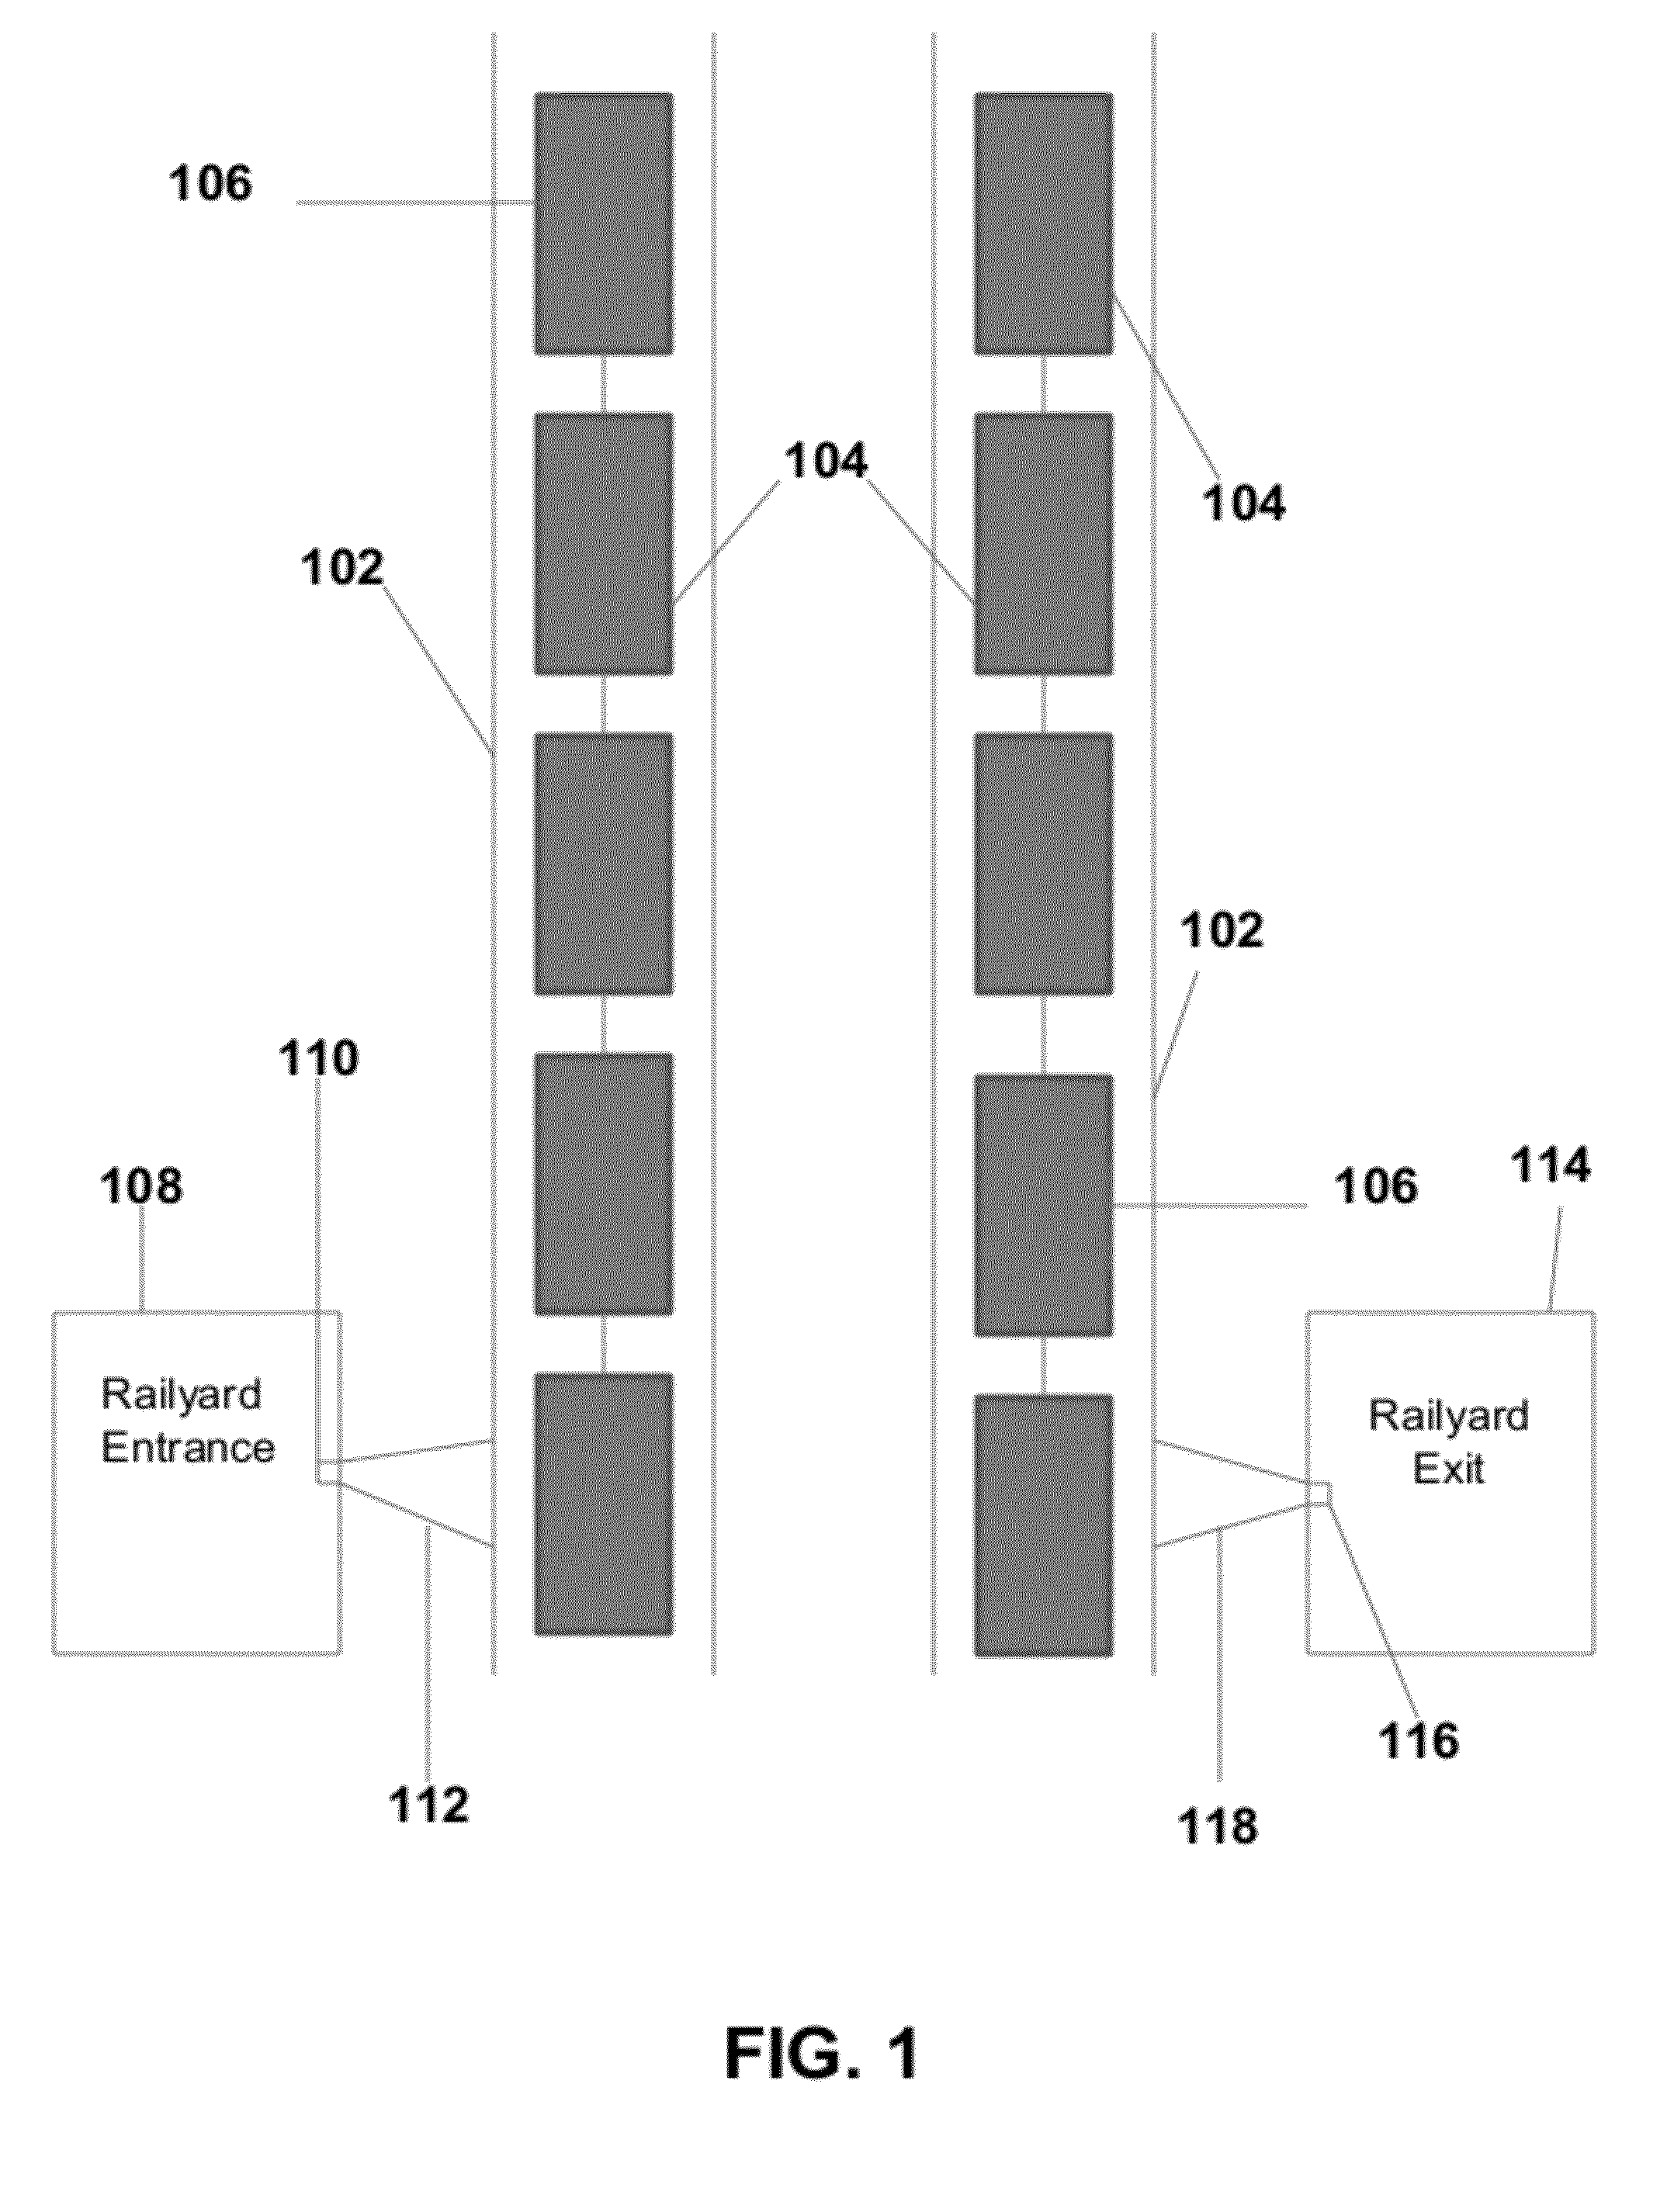 Method and system for capturing and inventoring railcar identification numbers